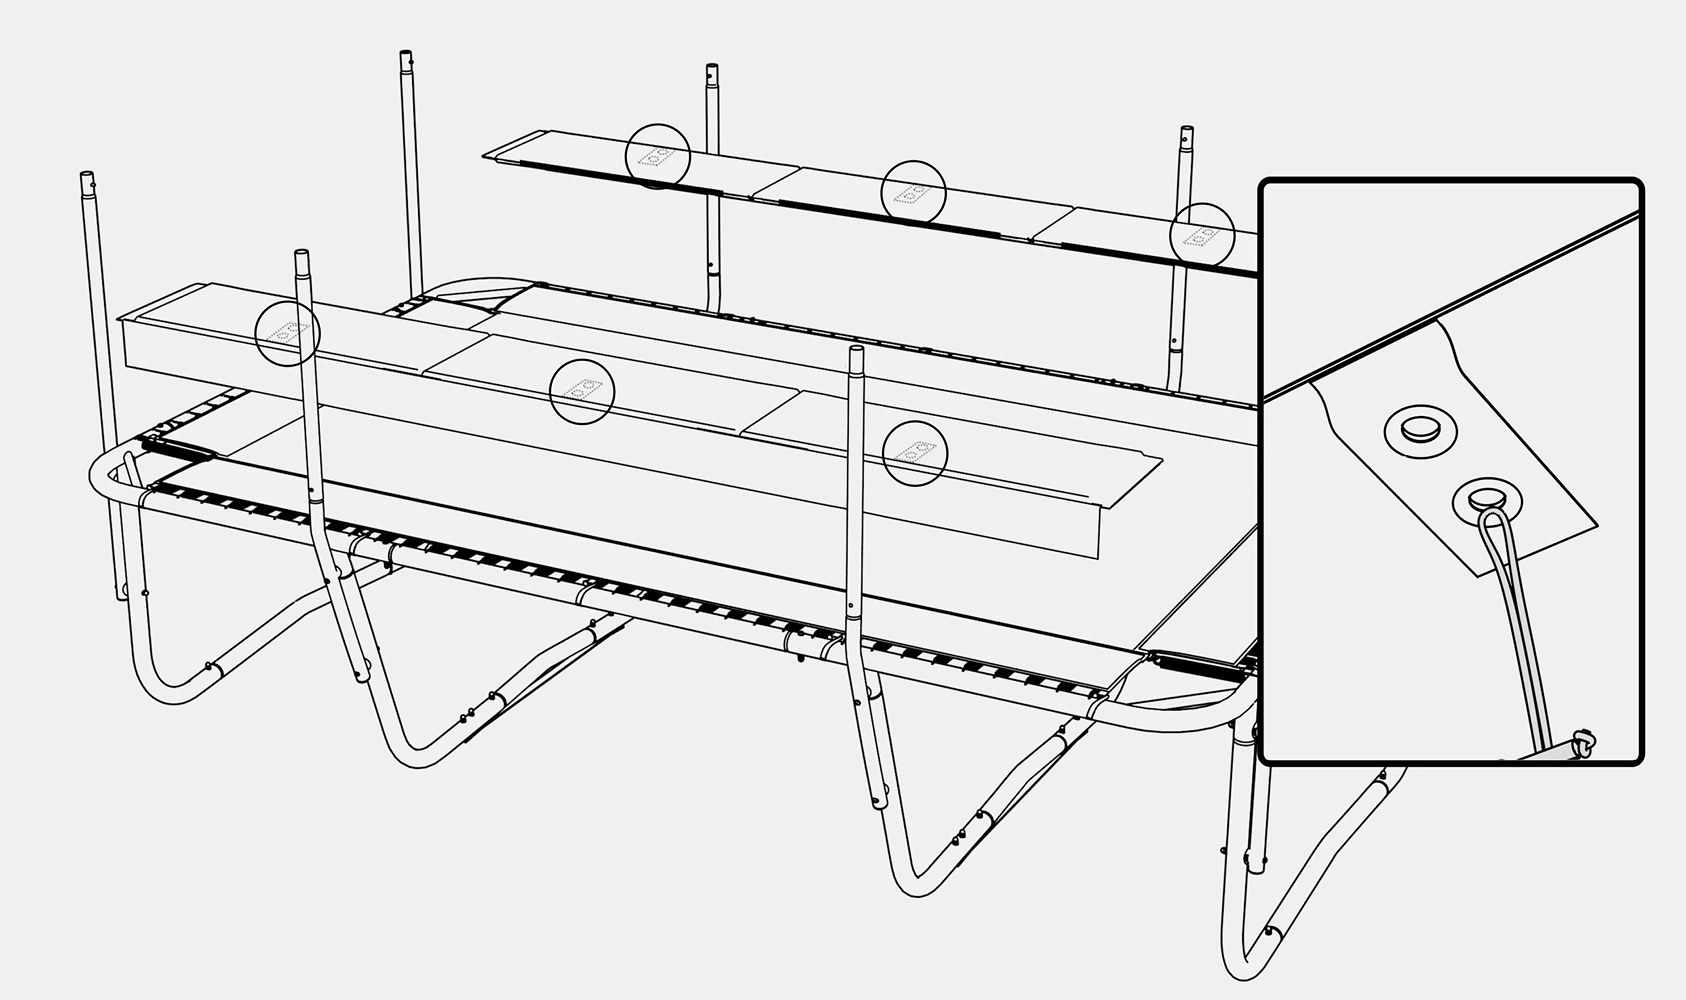 A trampoline assembly image from a manual.